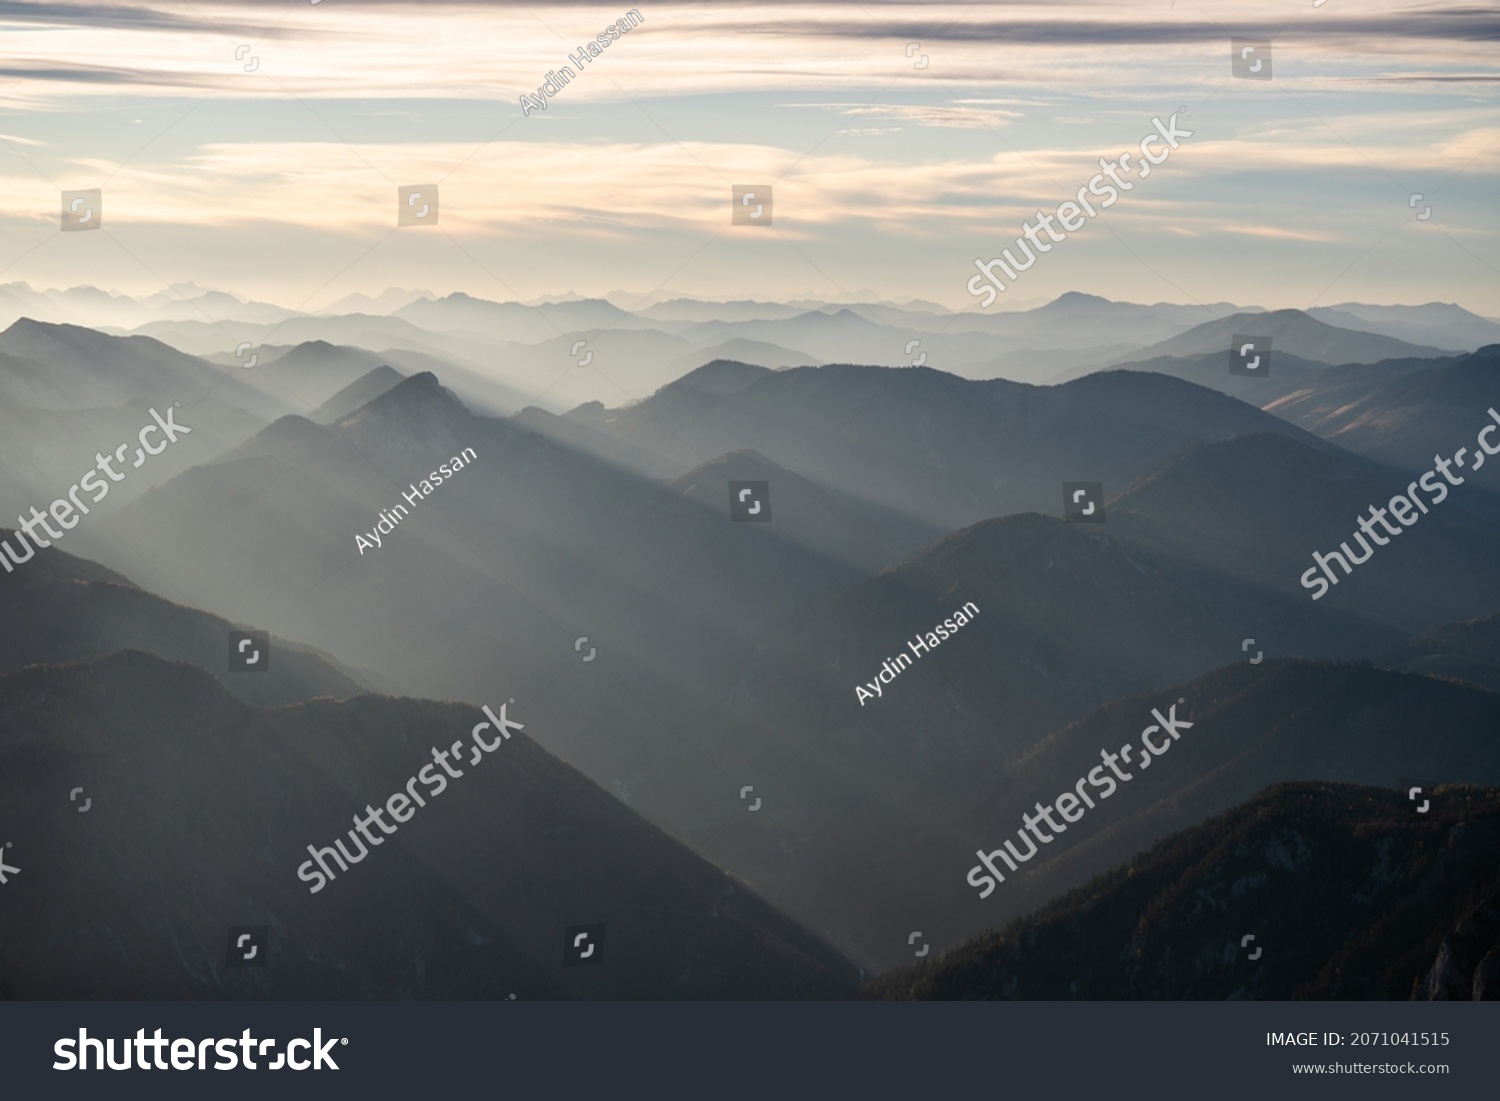 Diffused light during a sunset over the mountain peaks of Austria from Schneeberg during forest fires, Lower Austria, Austria #2071041515